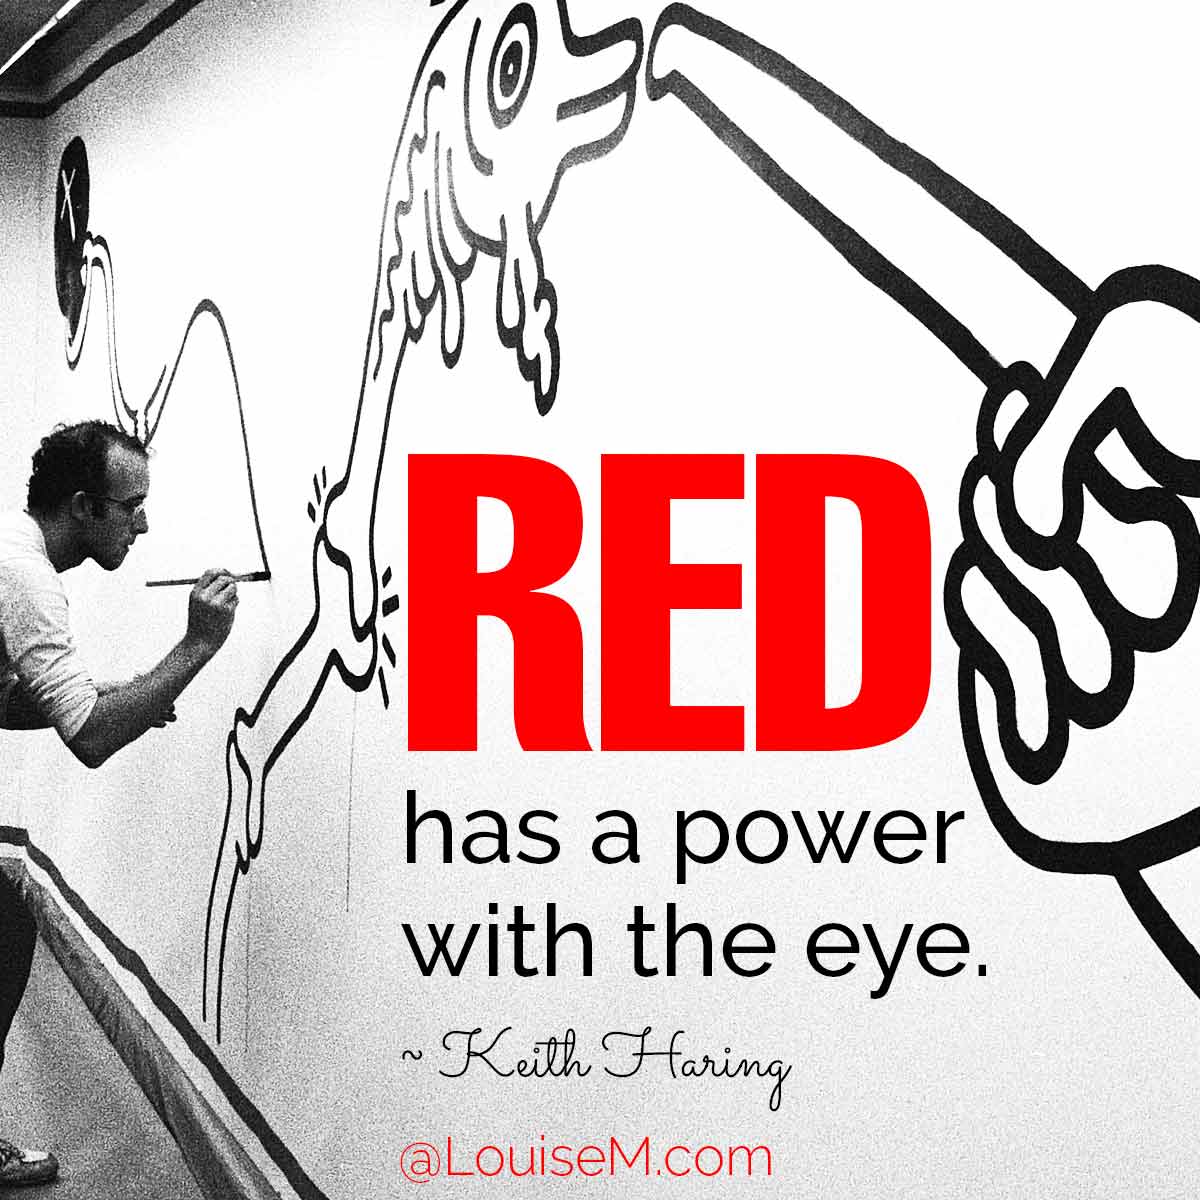 Keith Haring painting in art museum has his quote, red has power with the eye.